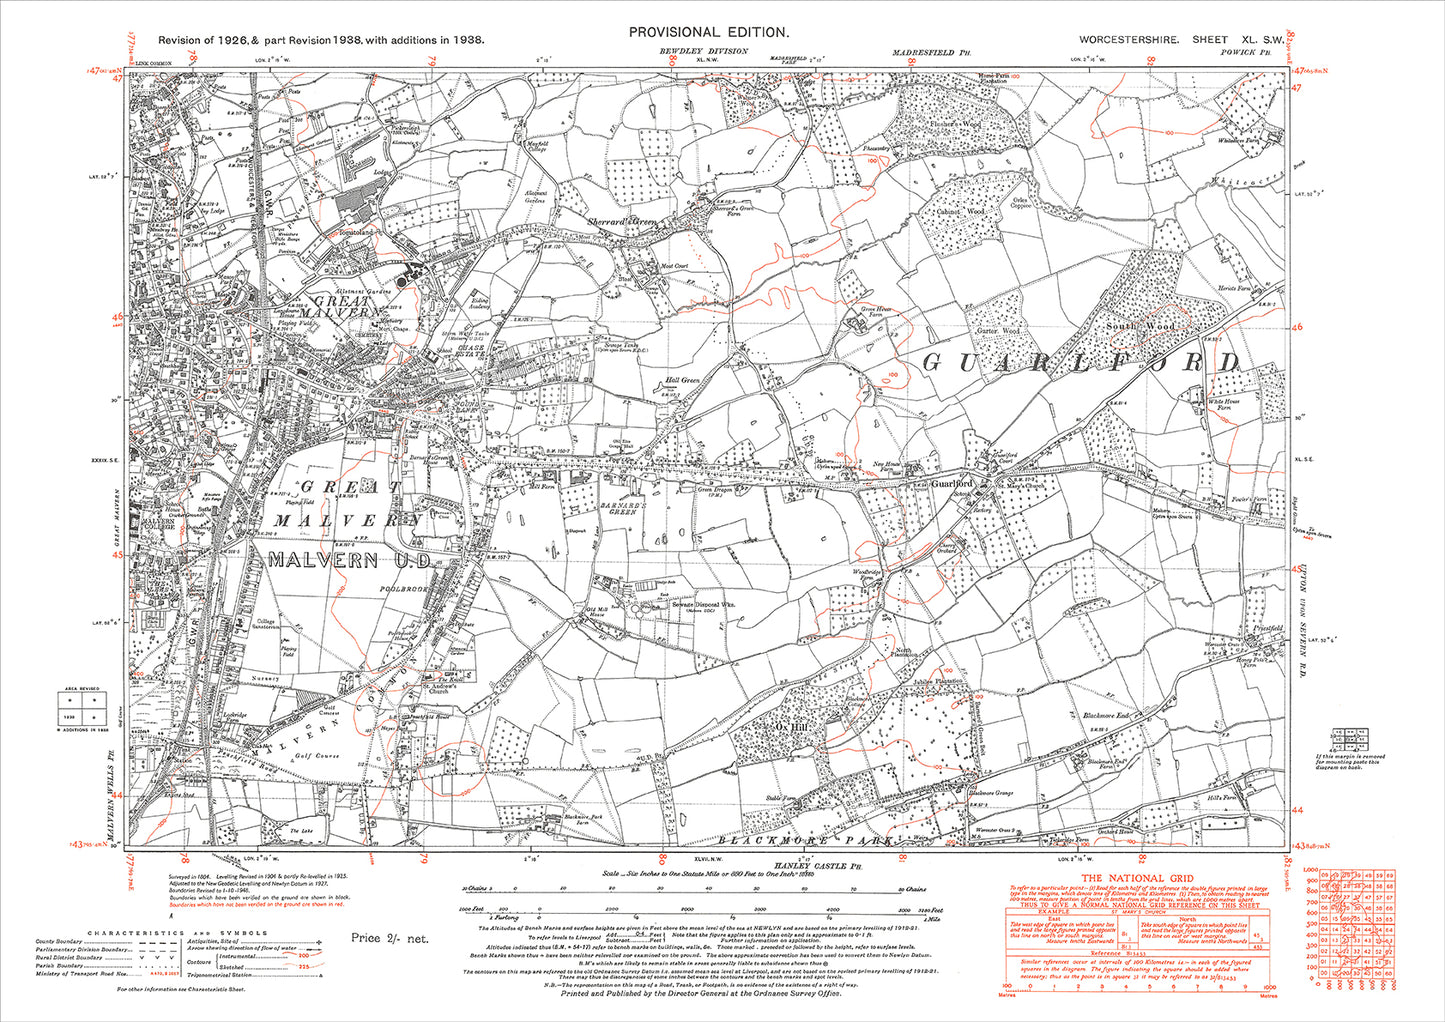 Great Malvern (east), Guarlford, old map Worcestershire 1938: 40SW